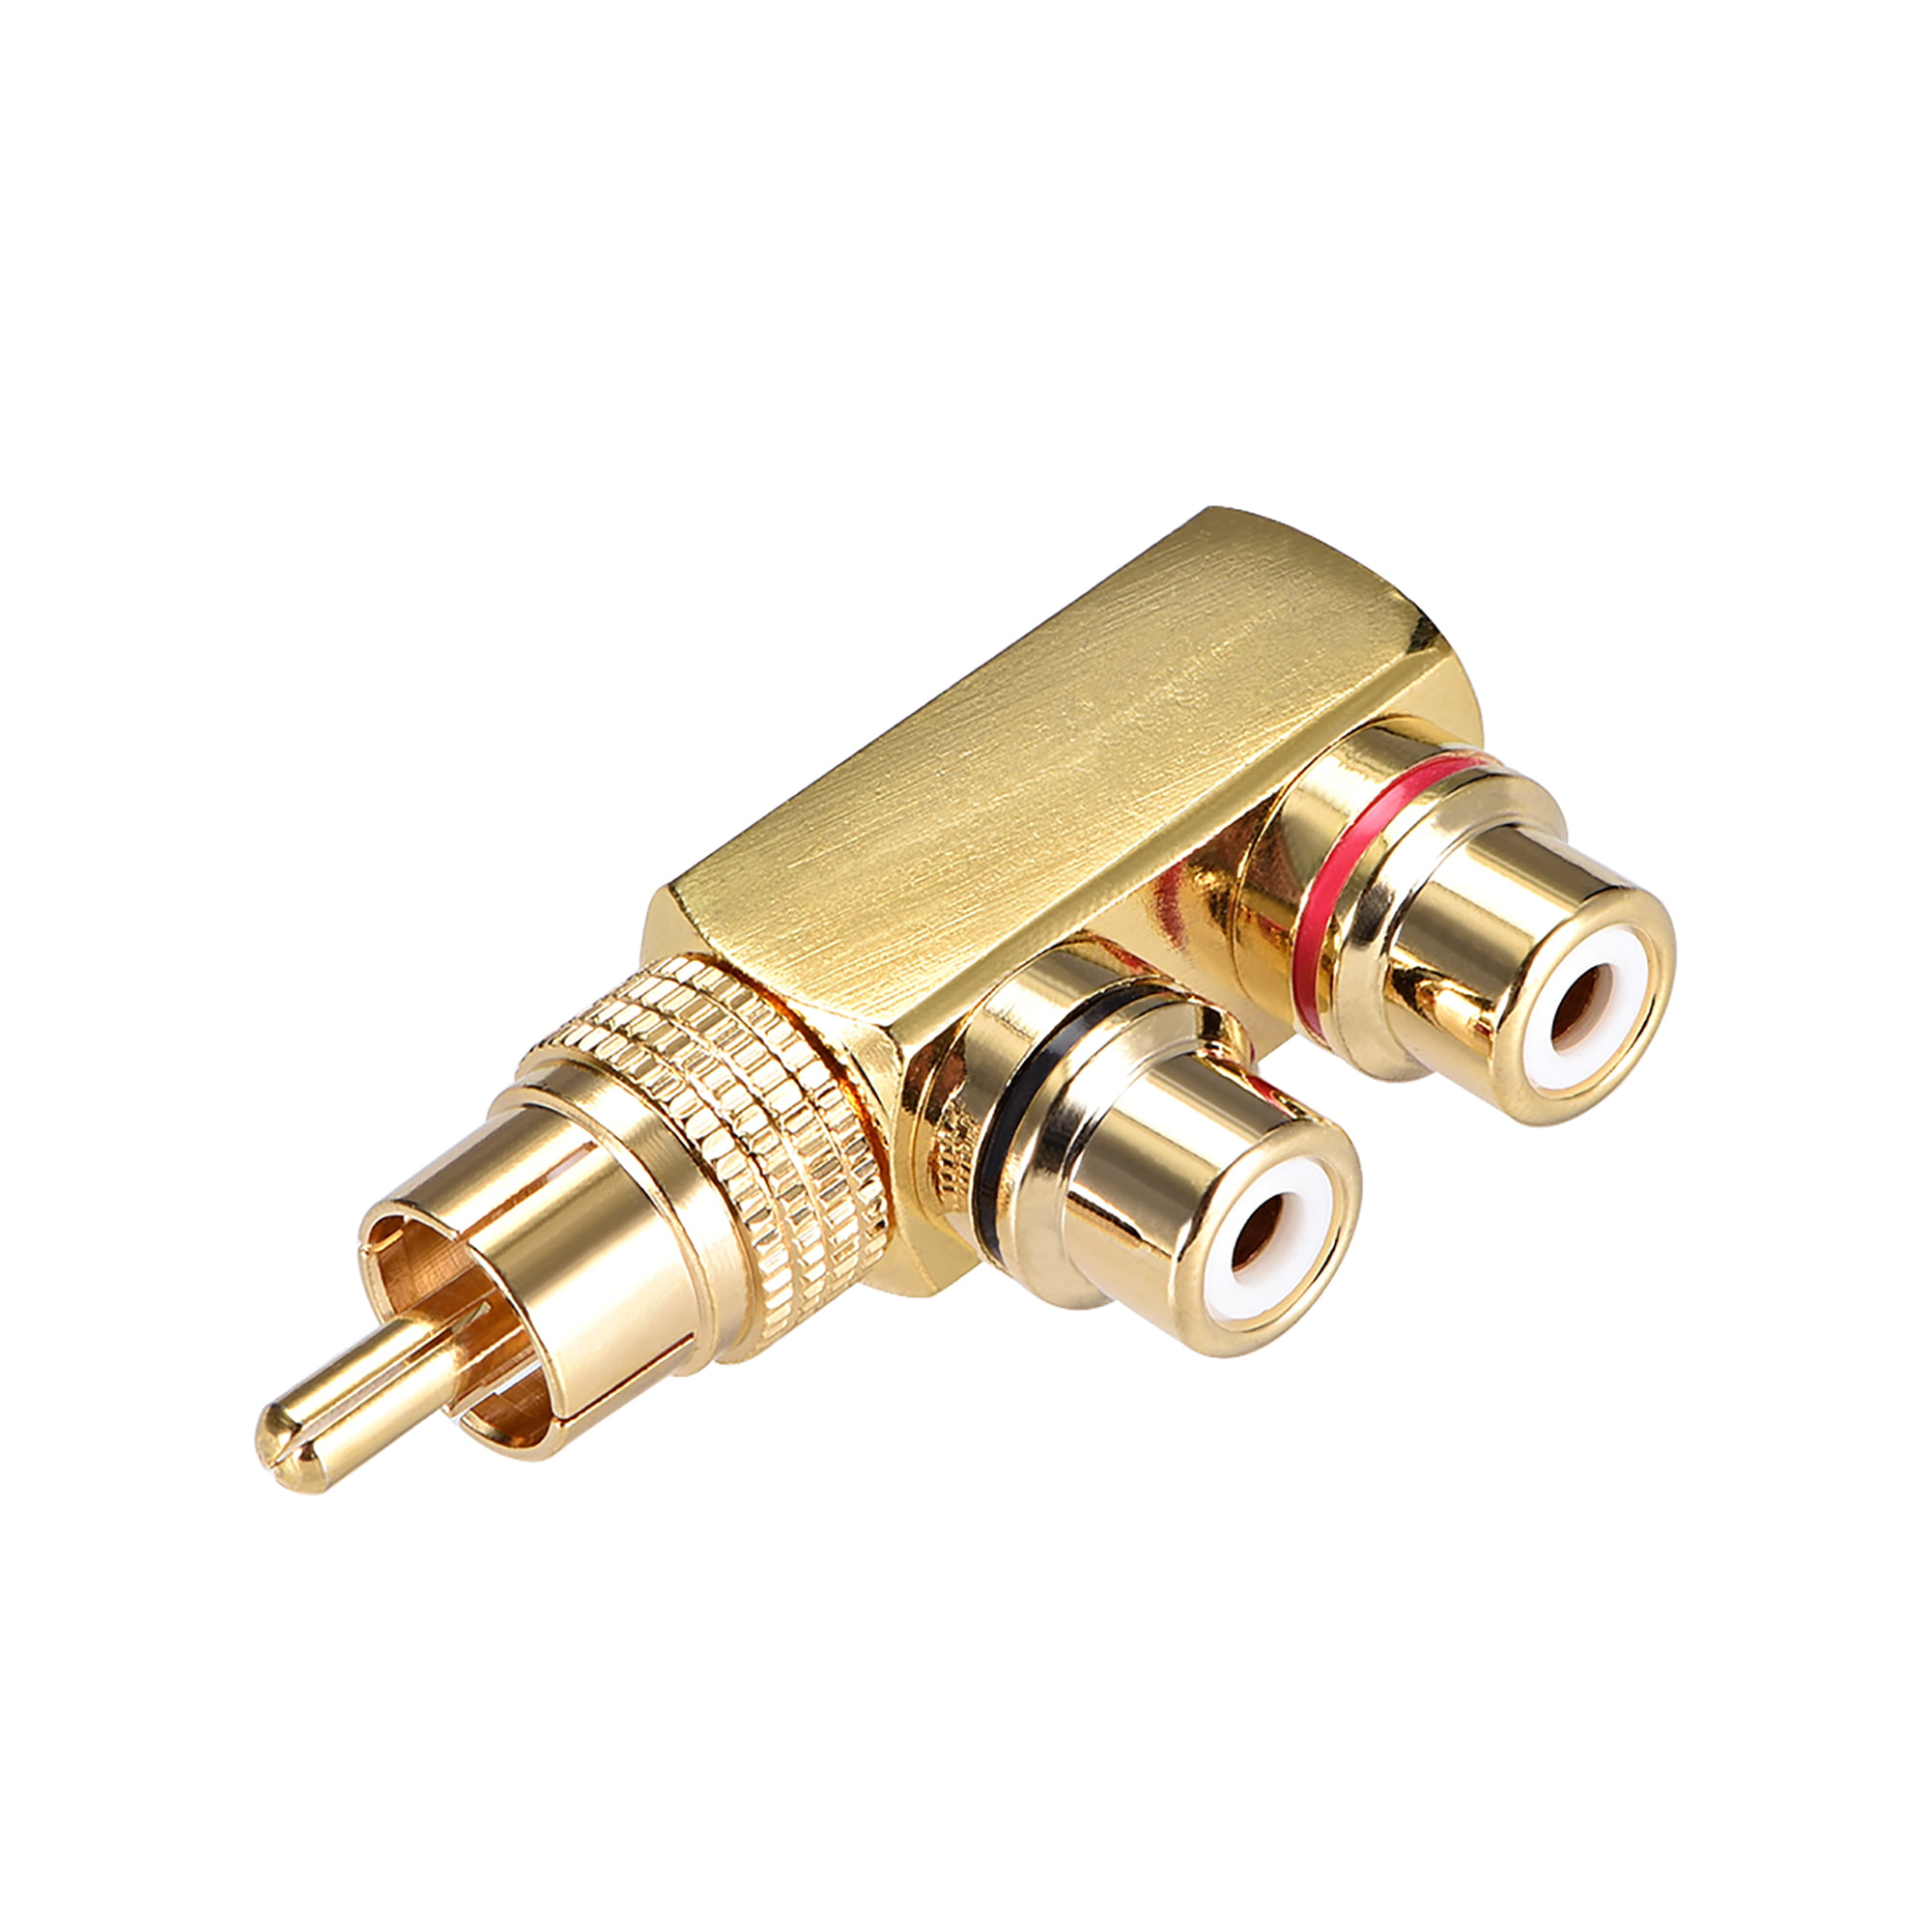 RCA male to 2 RCA female stereo audio connector video splitter adapter coupler brass gold plated 3 pieces